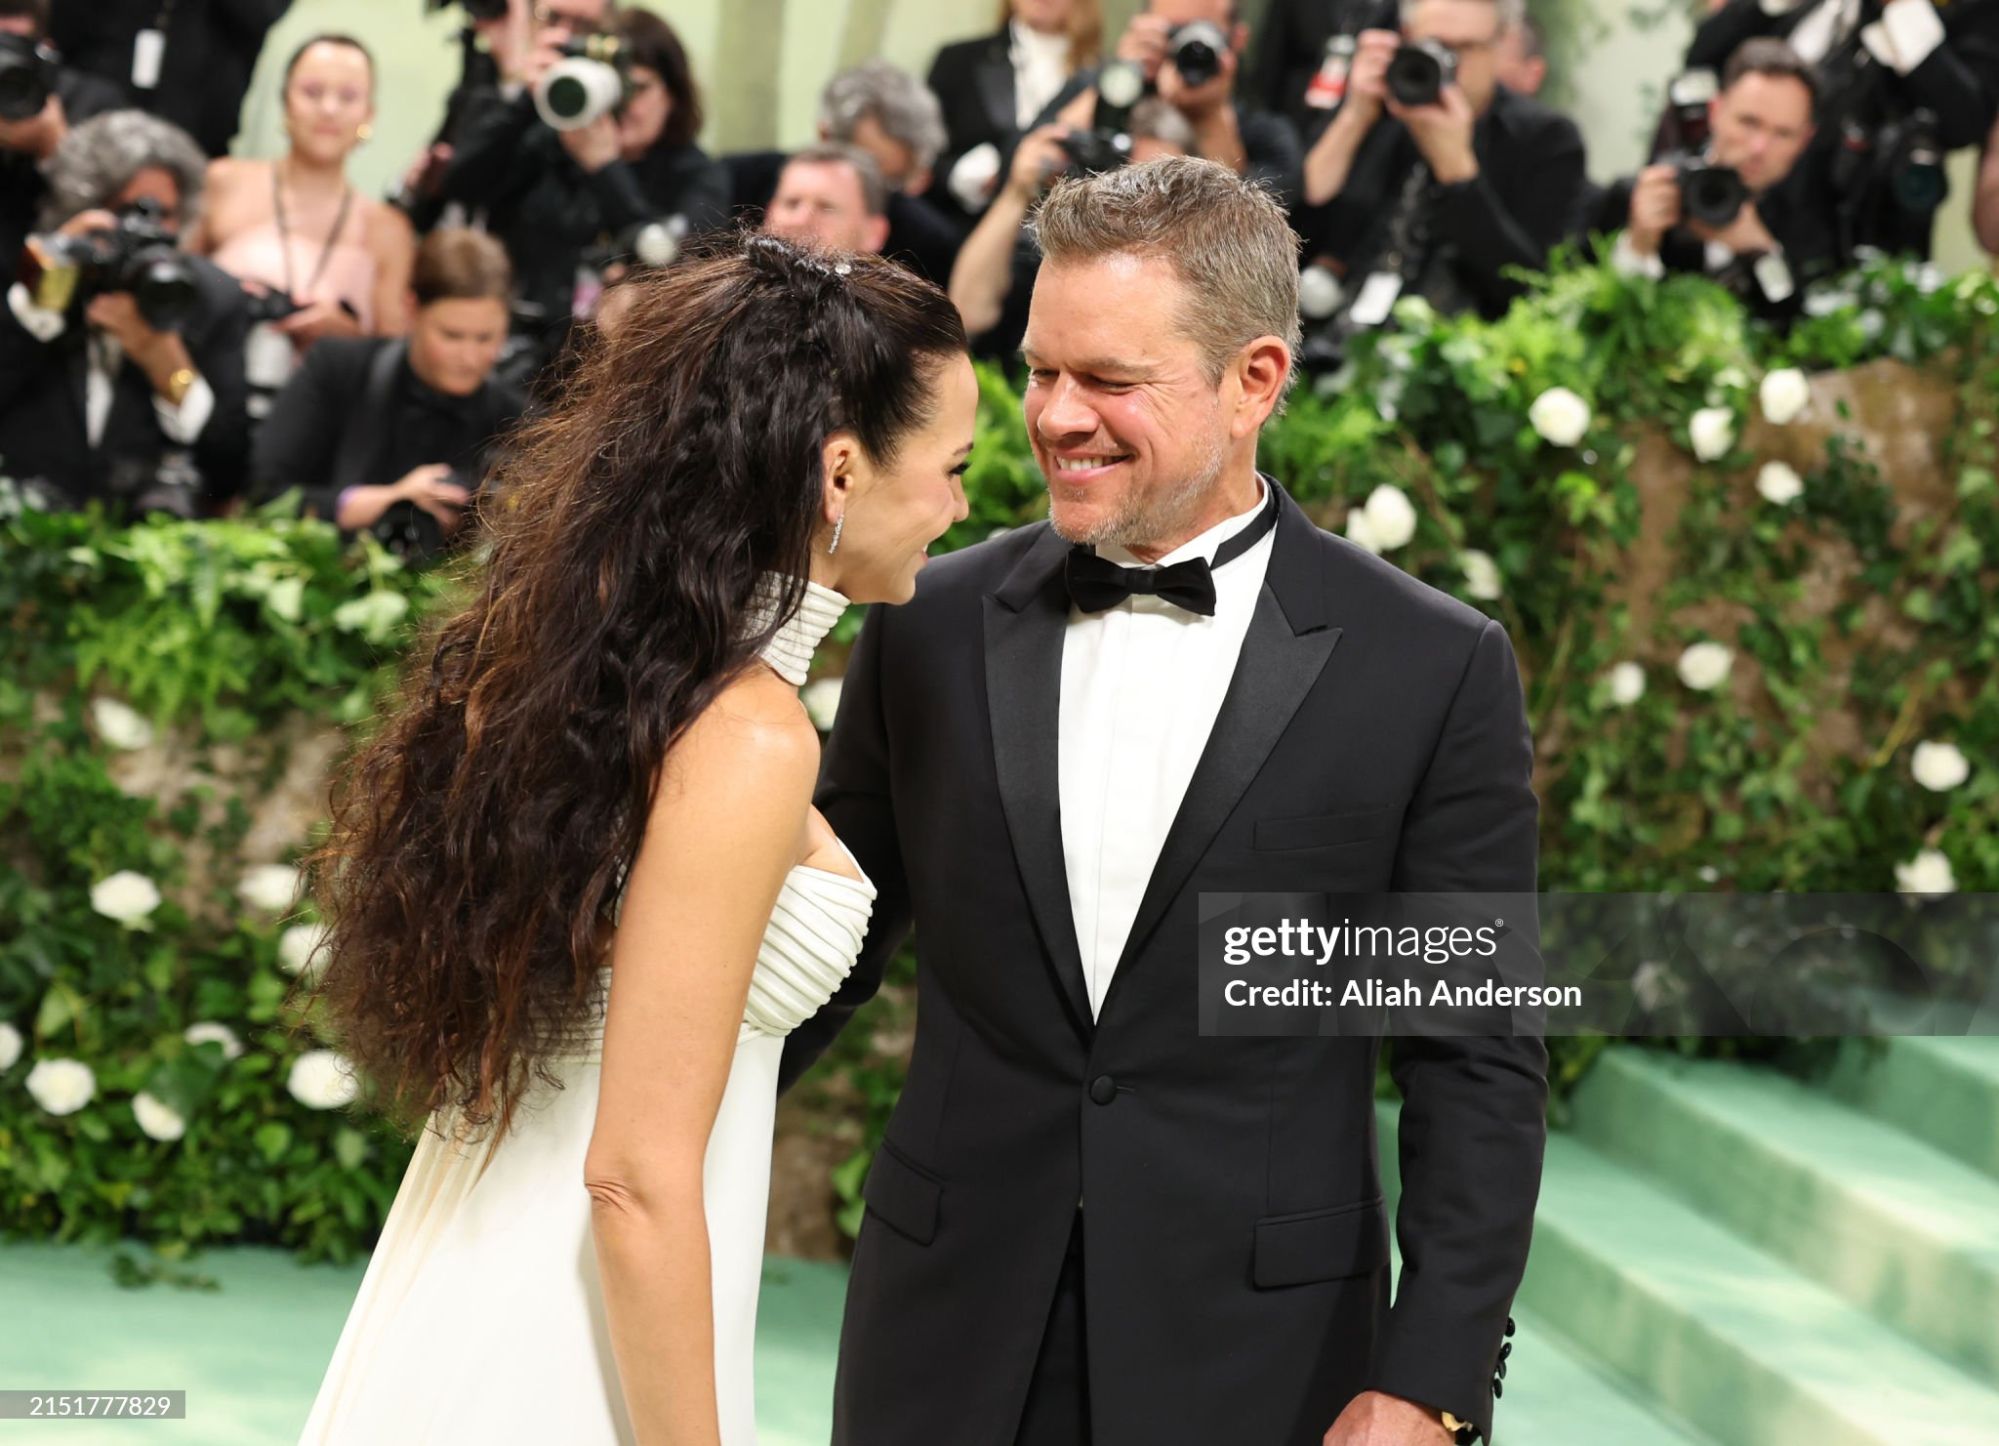 gettyimages-2151777829-2048x2048.jpg